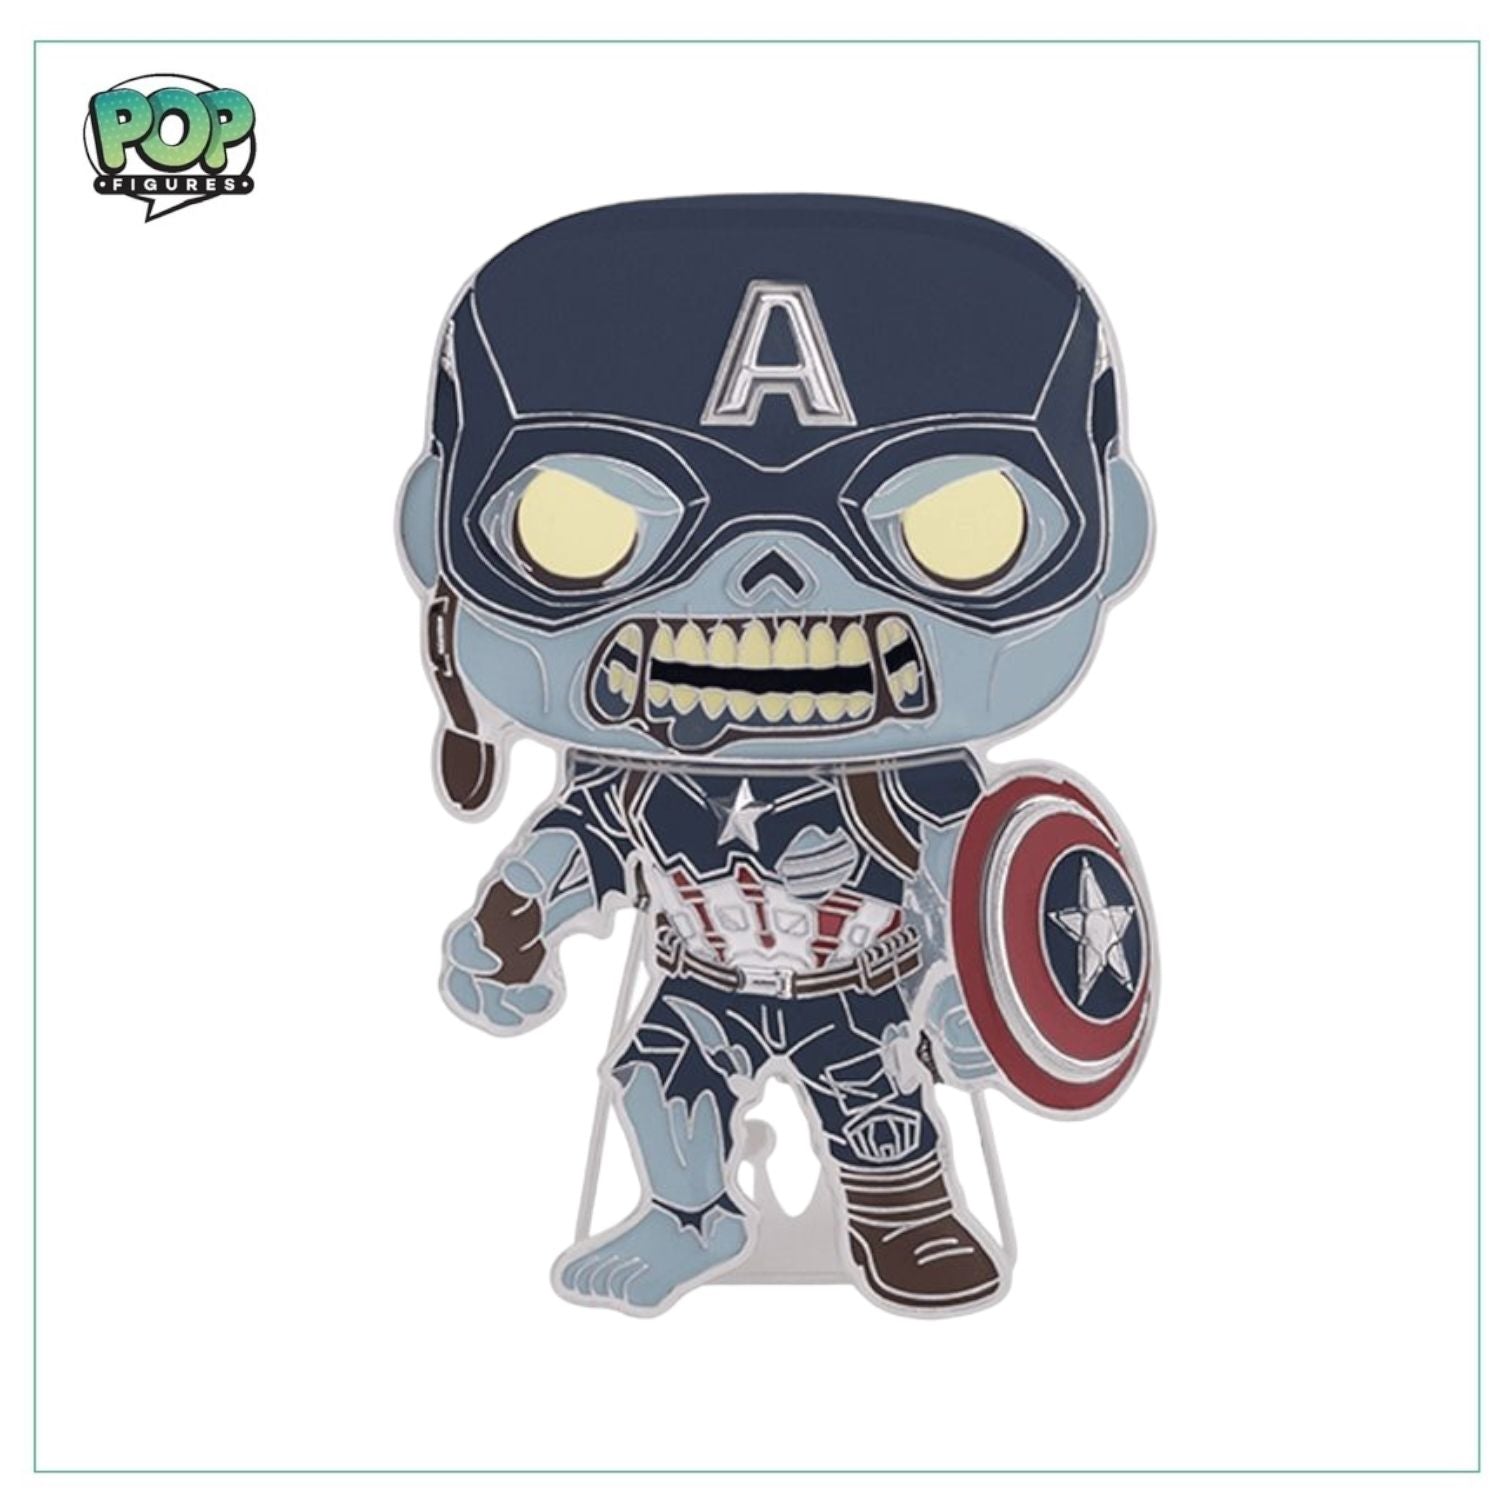 Zombie Captain America #21 Funko Pop Pin! - Marvel: What If